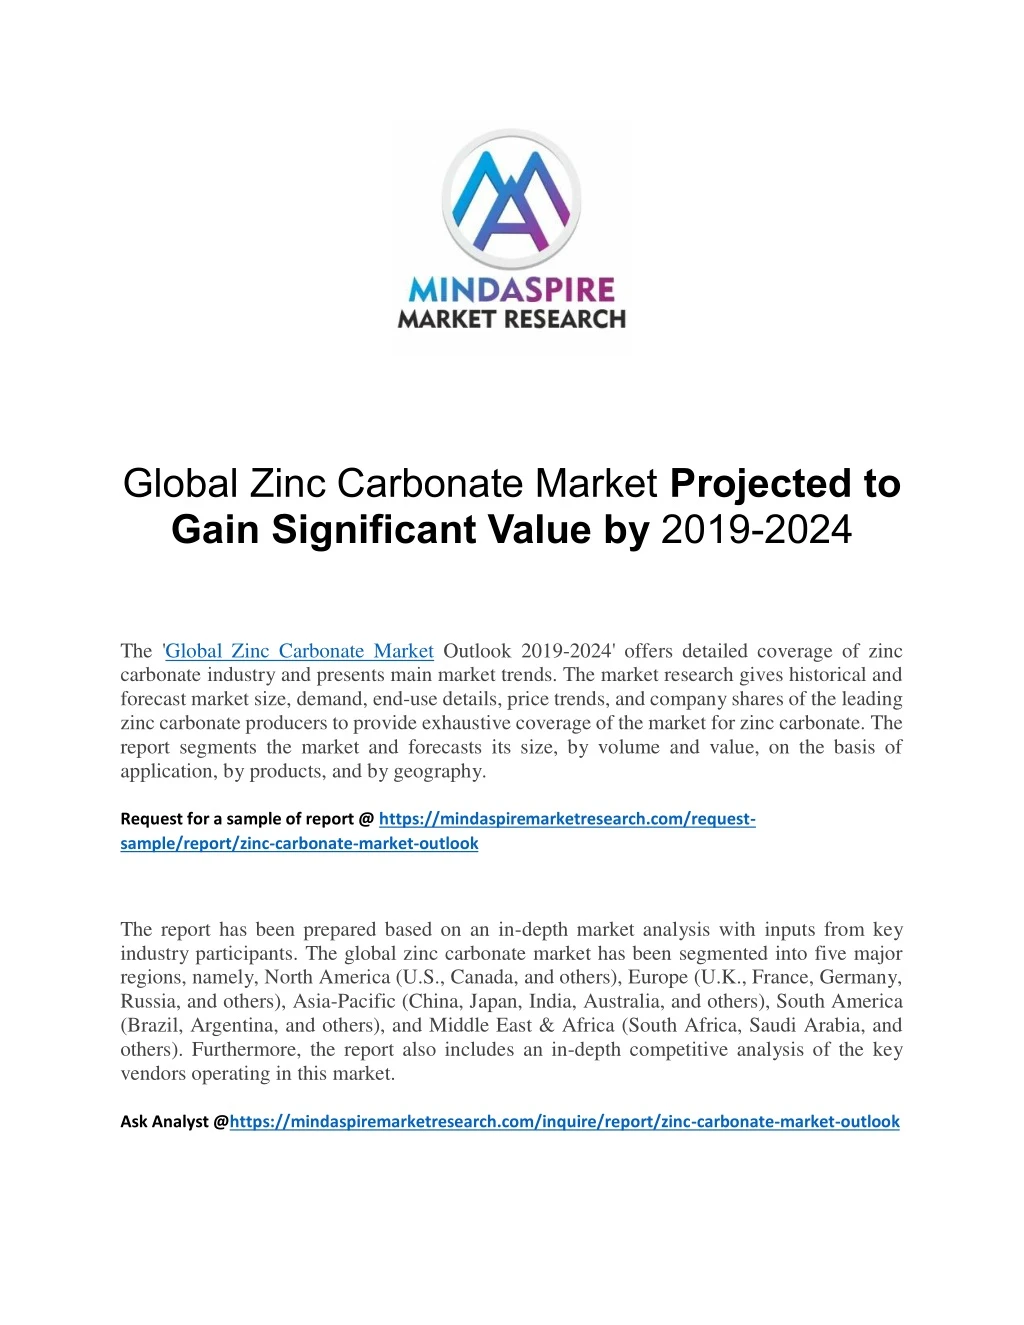 global zinc carbonate market projected to gain